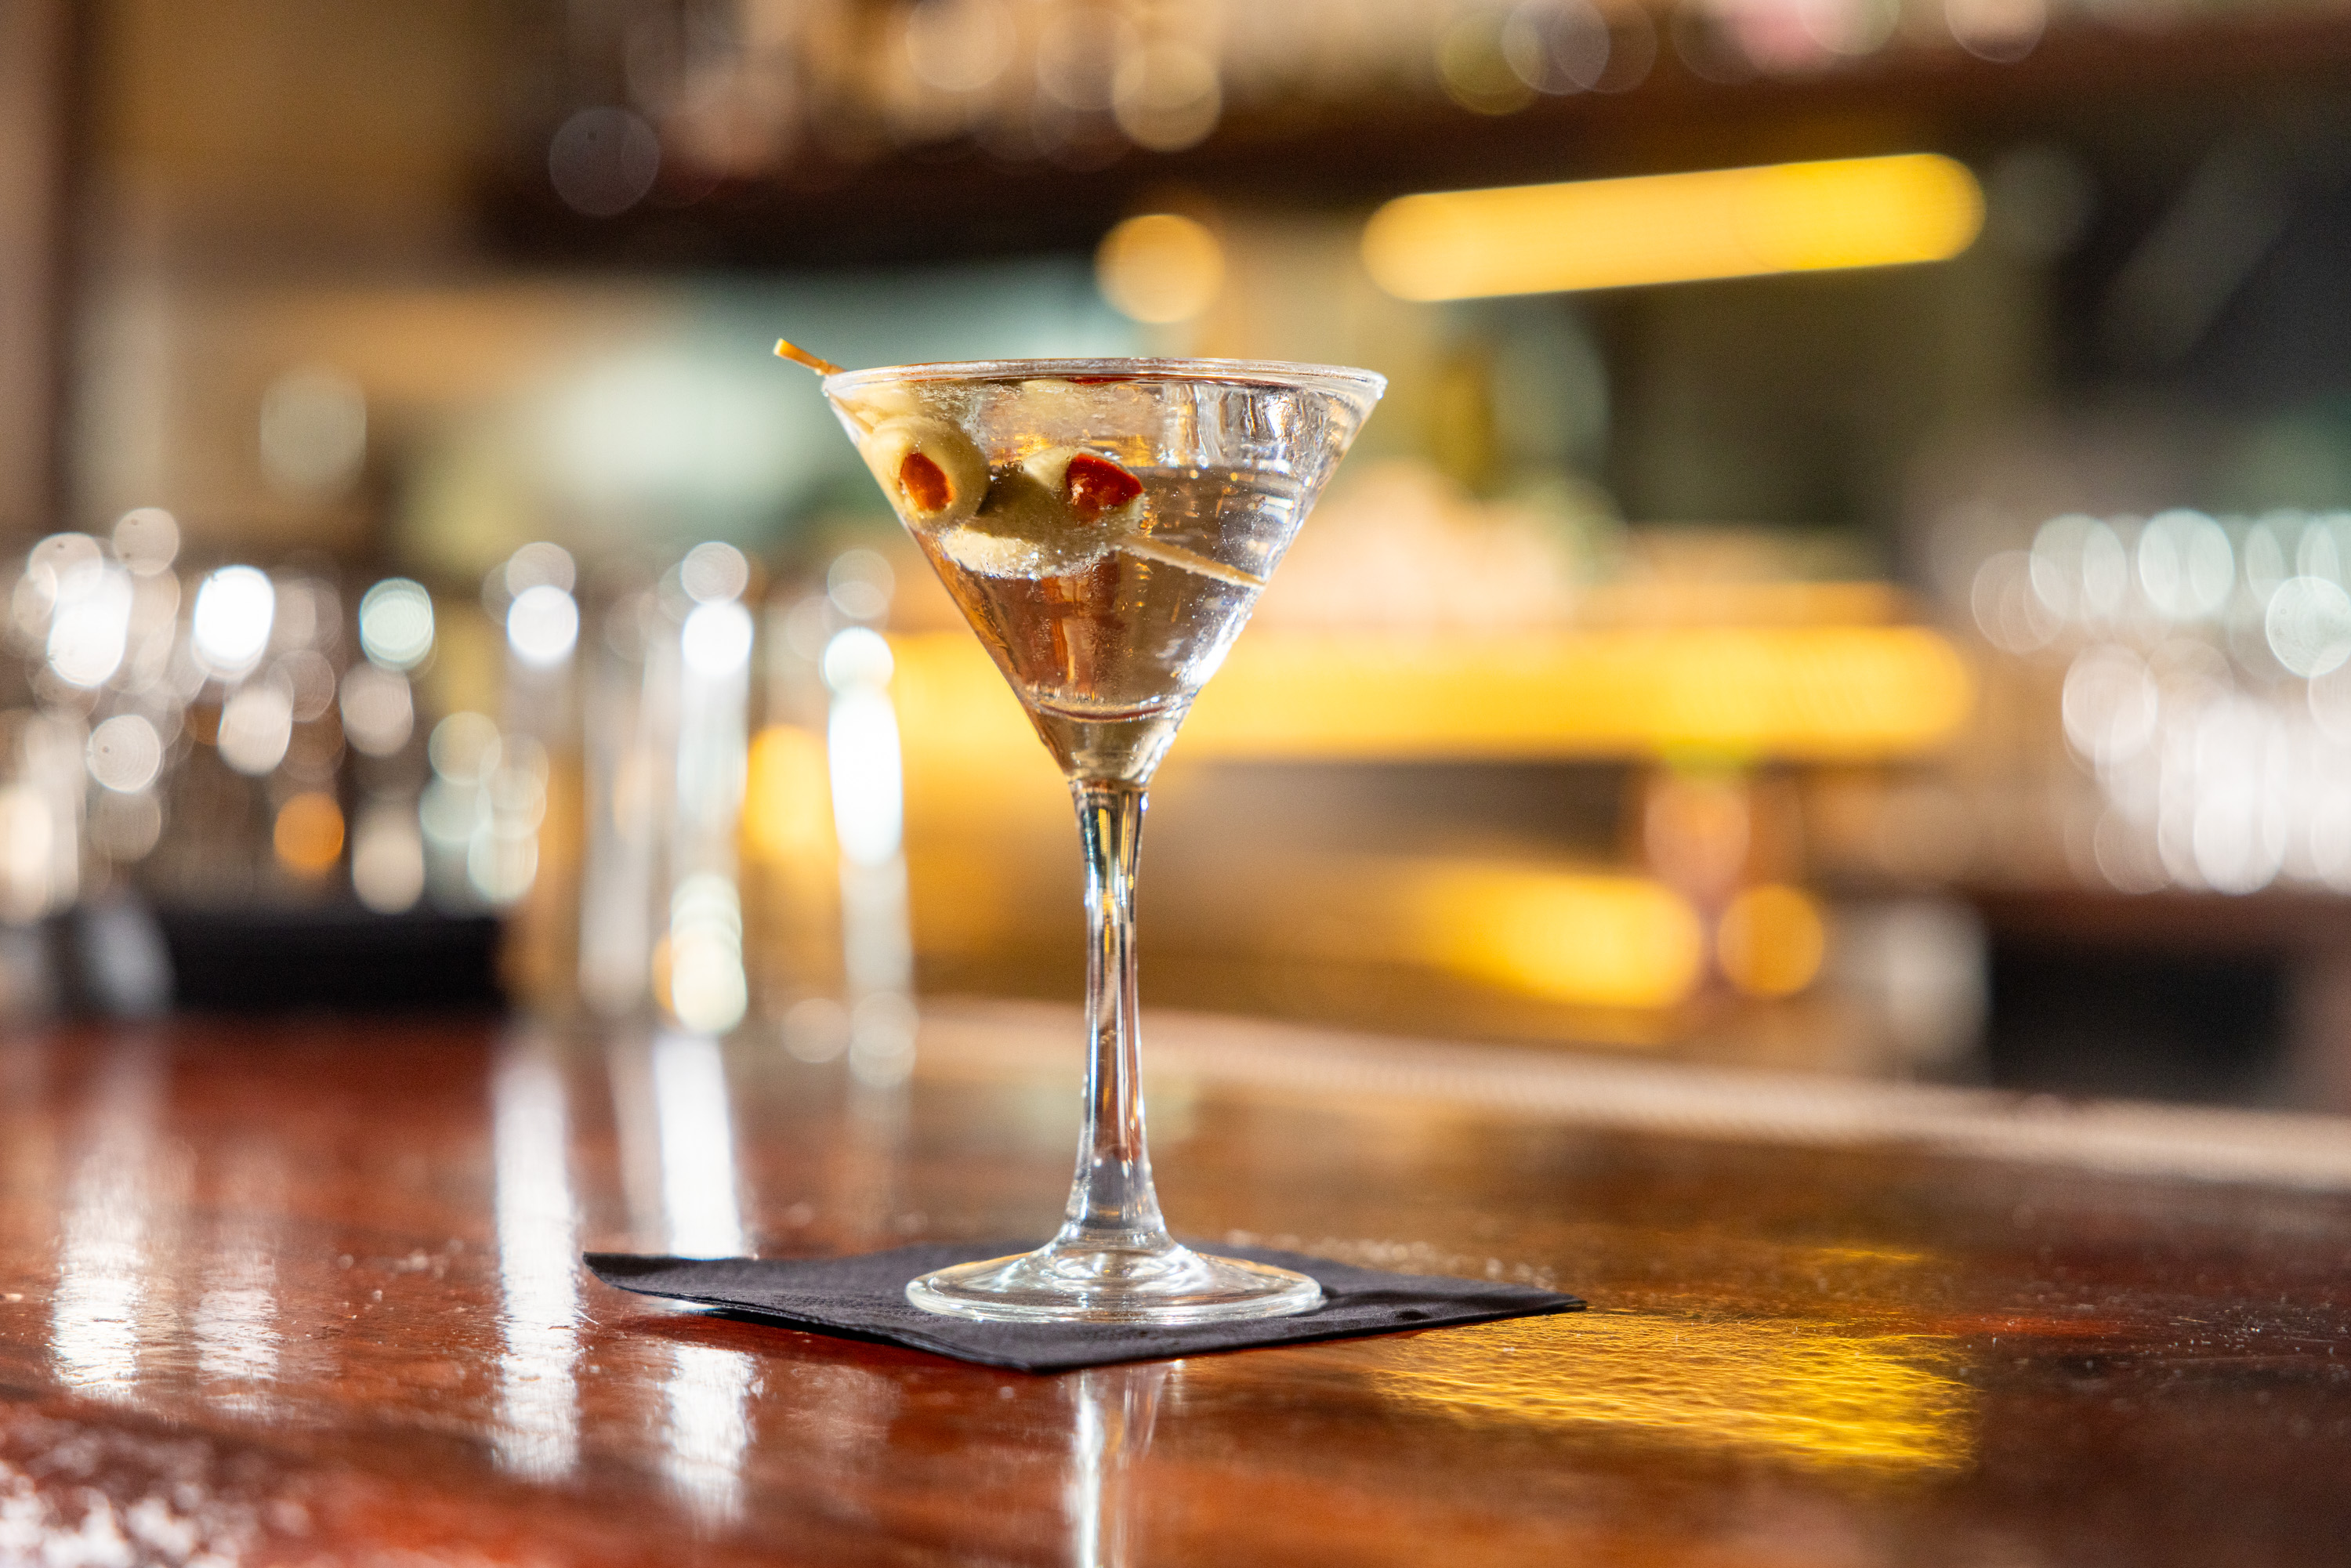 A martini glass with two olives skewered on a stick is placed on a dark square napkin on a polished wooden bar top, with a blurry background of bar lights.